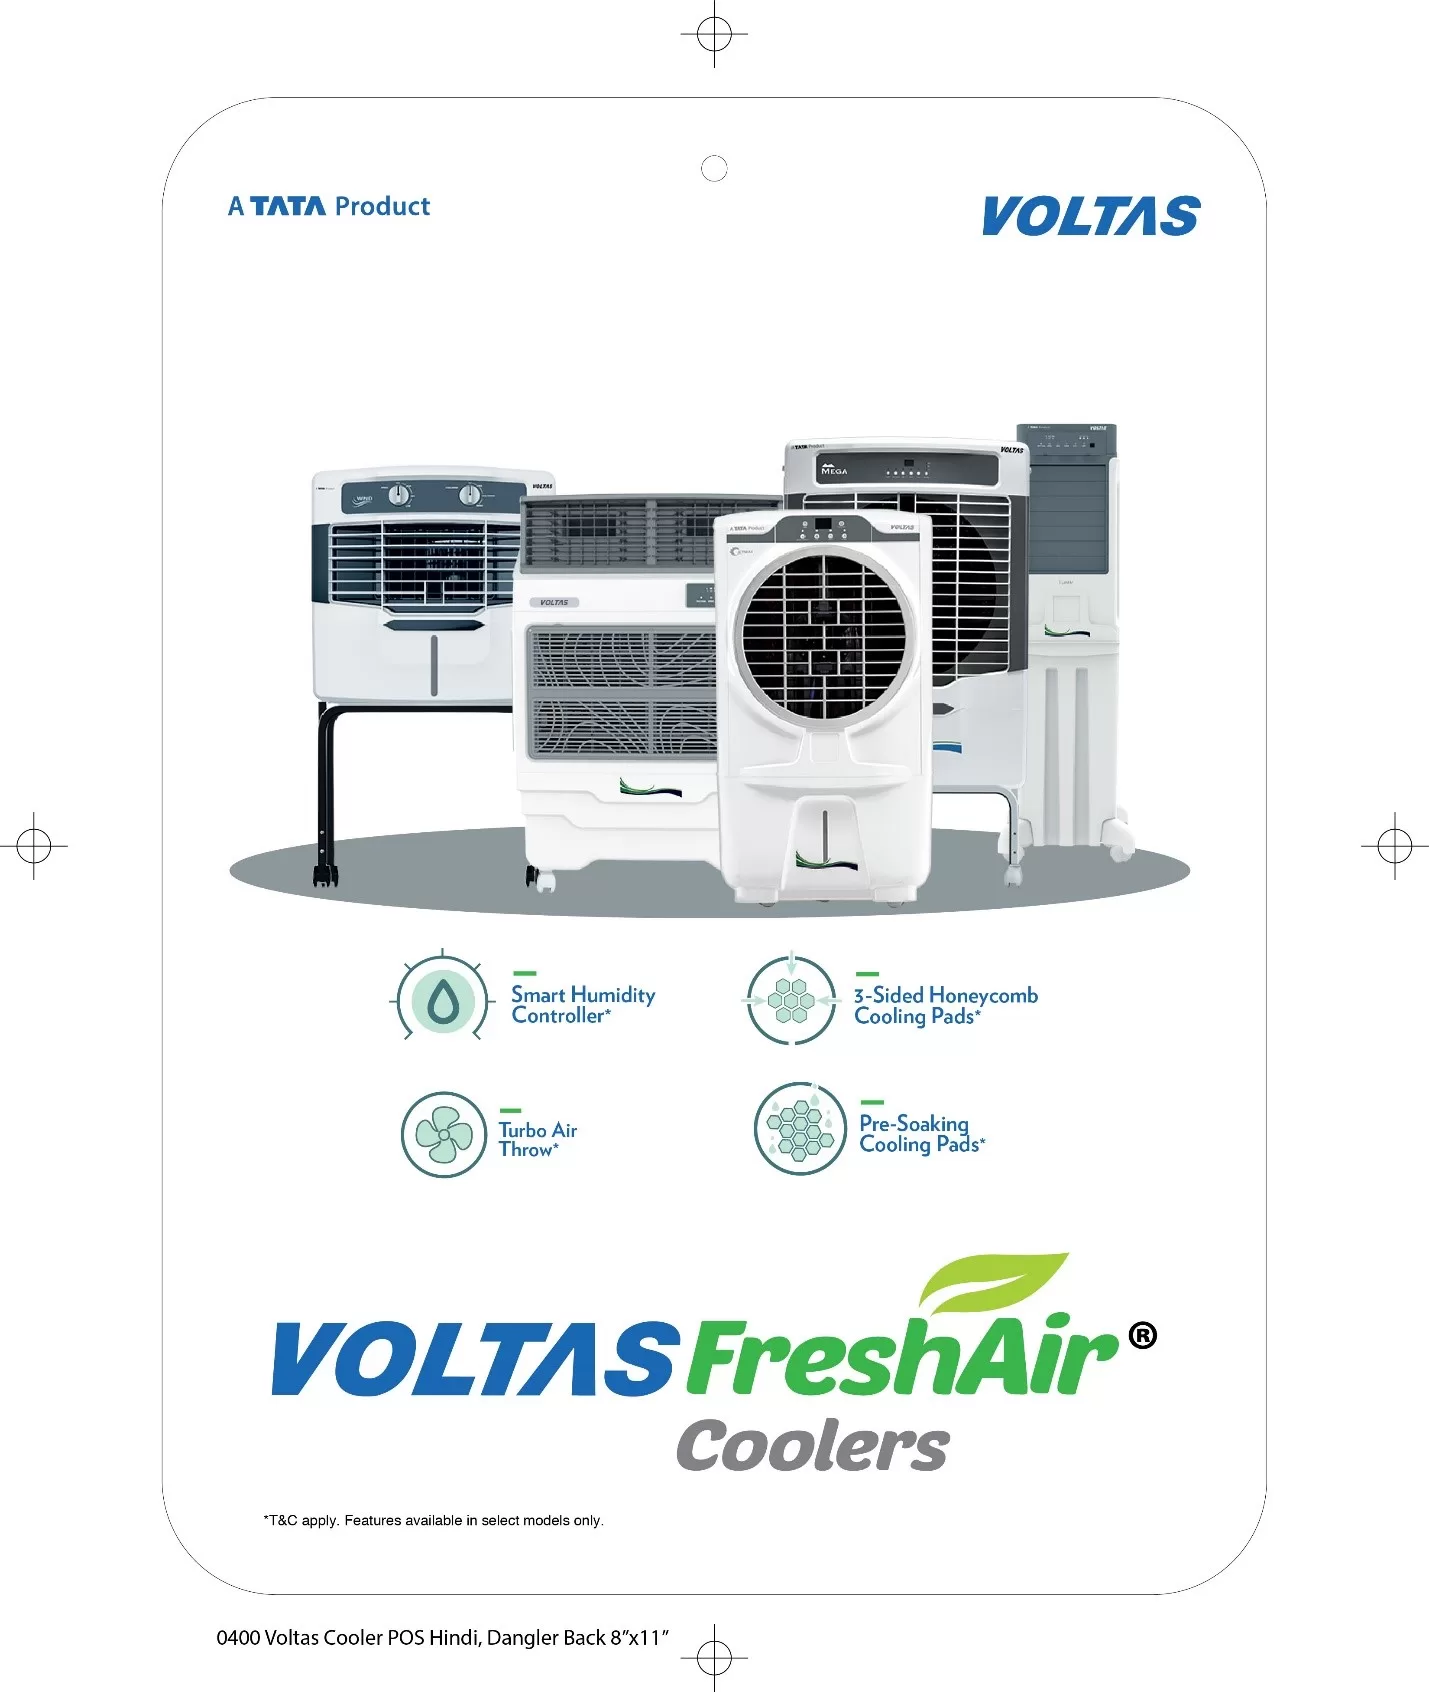 Voltas launches its extensive range of FreshAir Coolers for 2023 Showcases its new 4-side cooling technology in Air Coolers